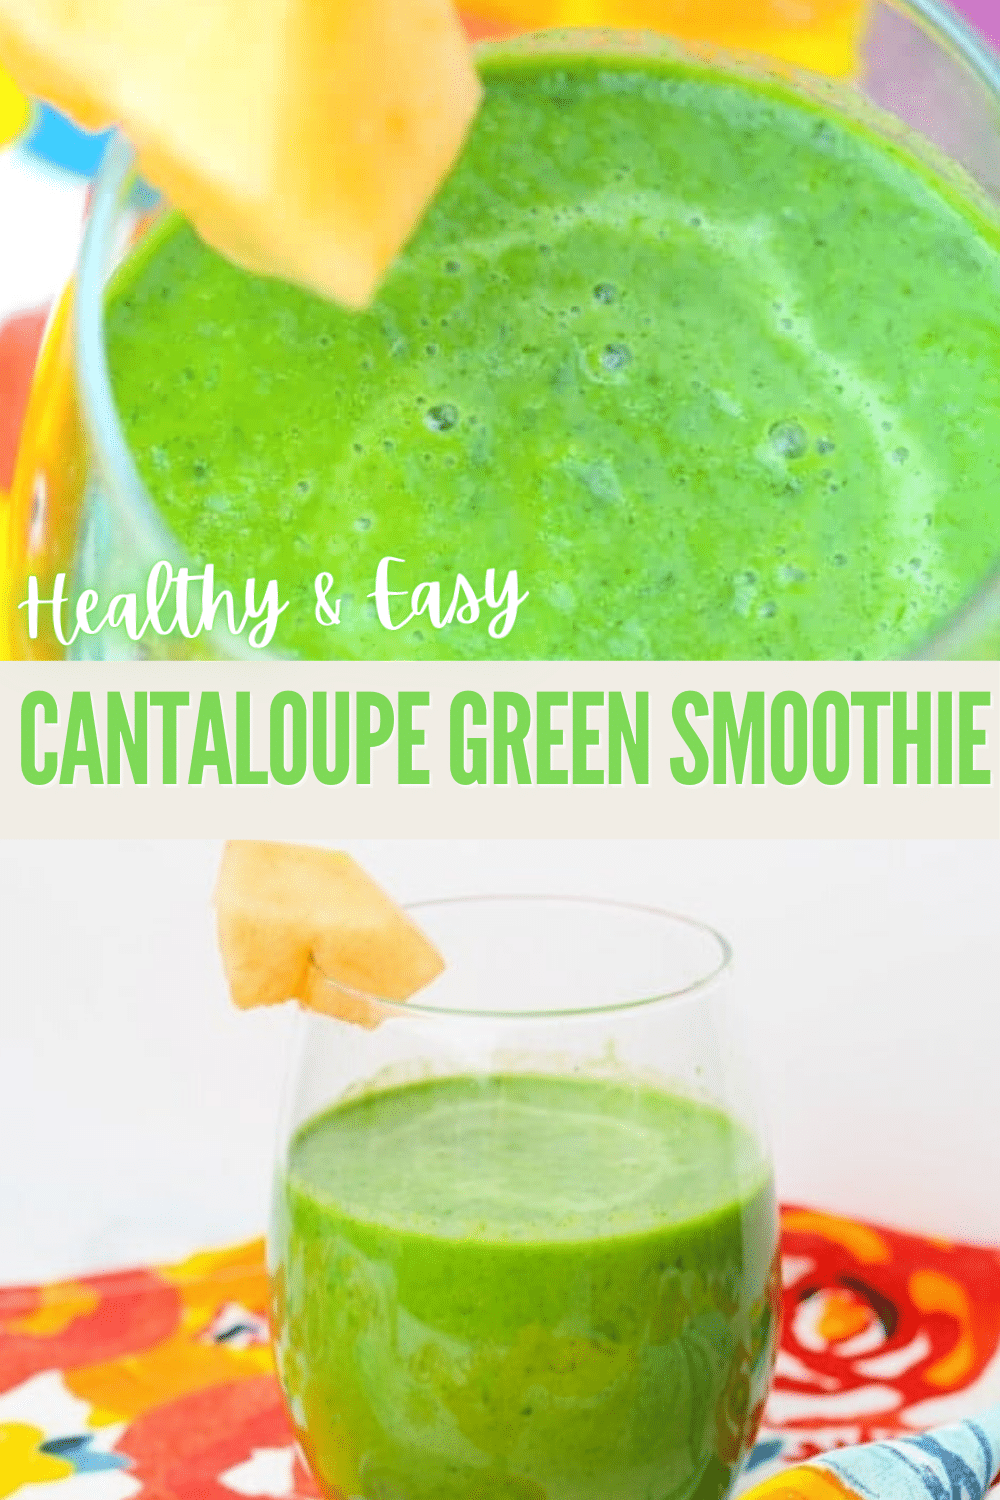 This Cantaloupe Green Smoothie is as delicious as it is nutritious and easy to make. All you need are four simple ingredients and a few minutes to make it. #smoothie #smoothierecipe #cantaloupe #greensmoothie via @wondermomwannab